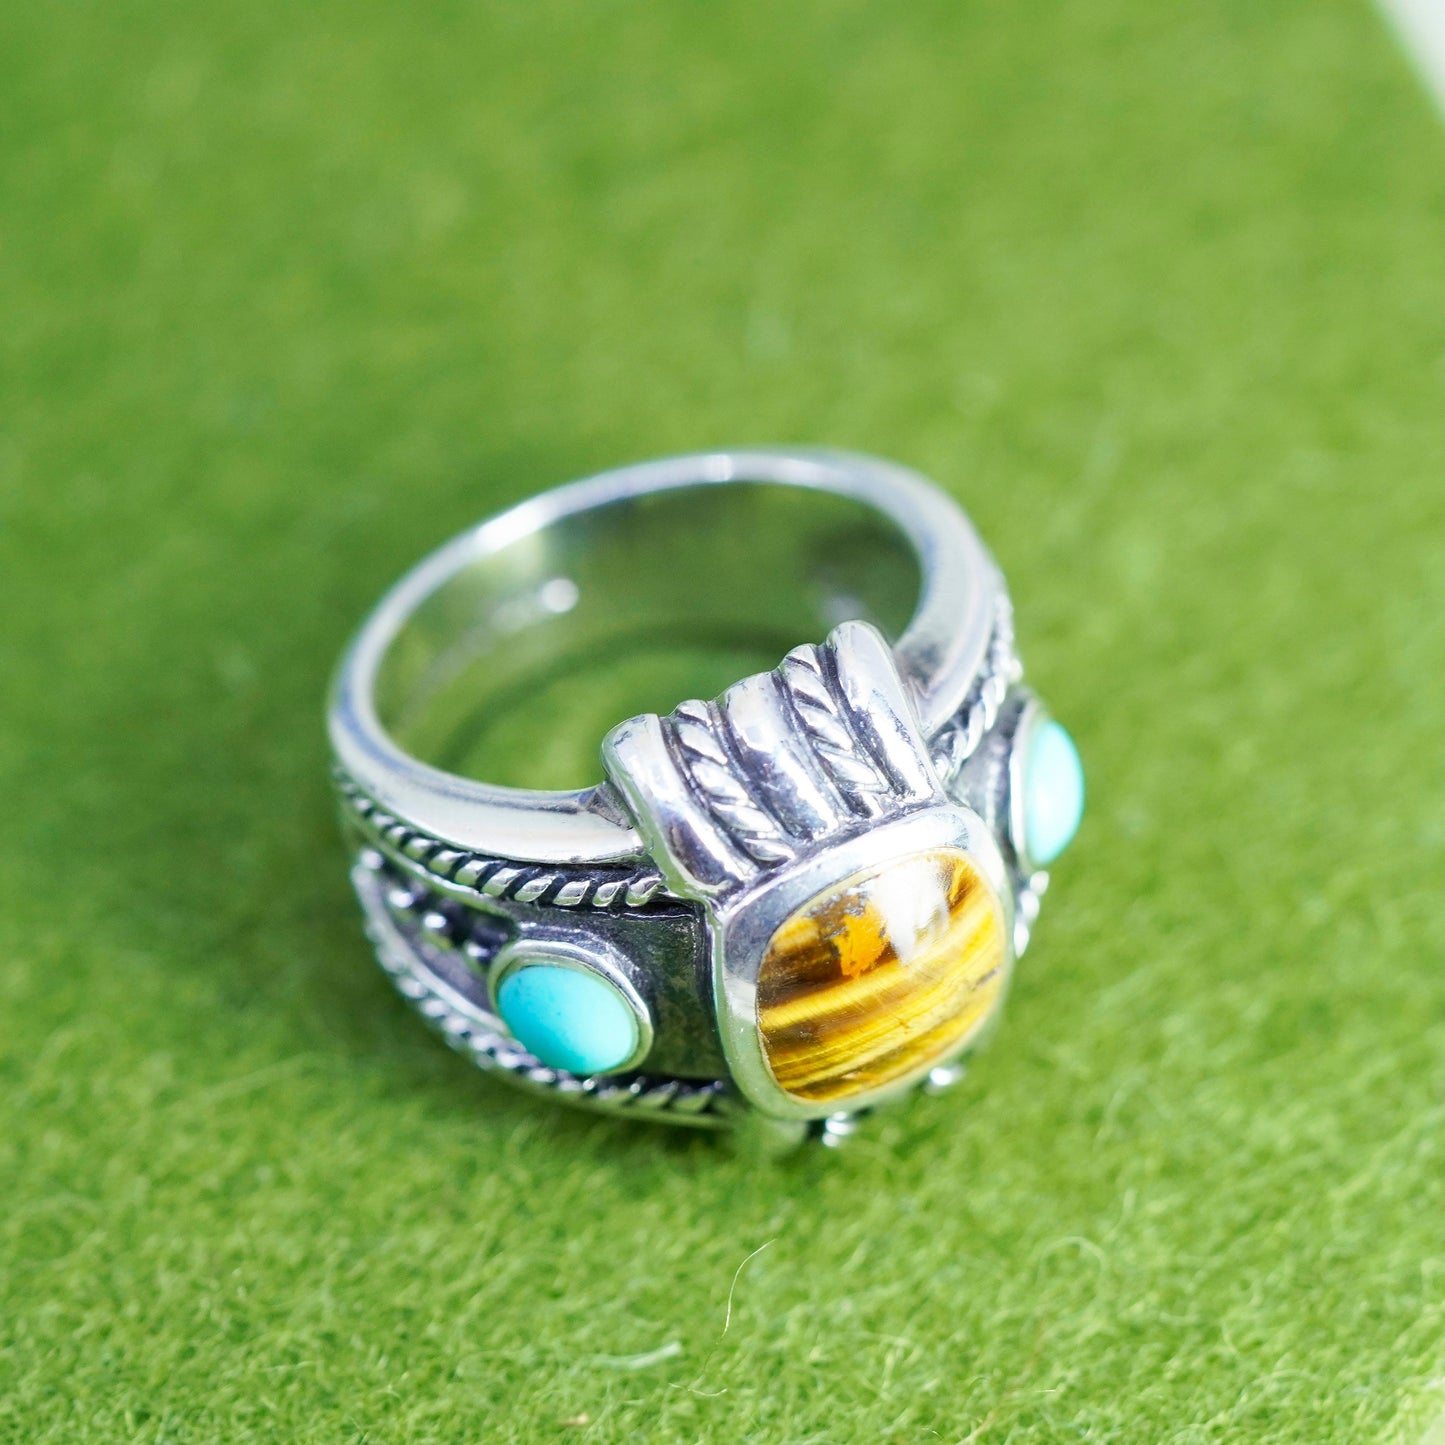 Size 7, sterling silver ring, band with golden tiger eye and turquoise beads